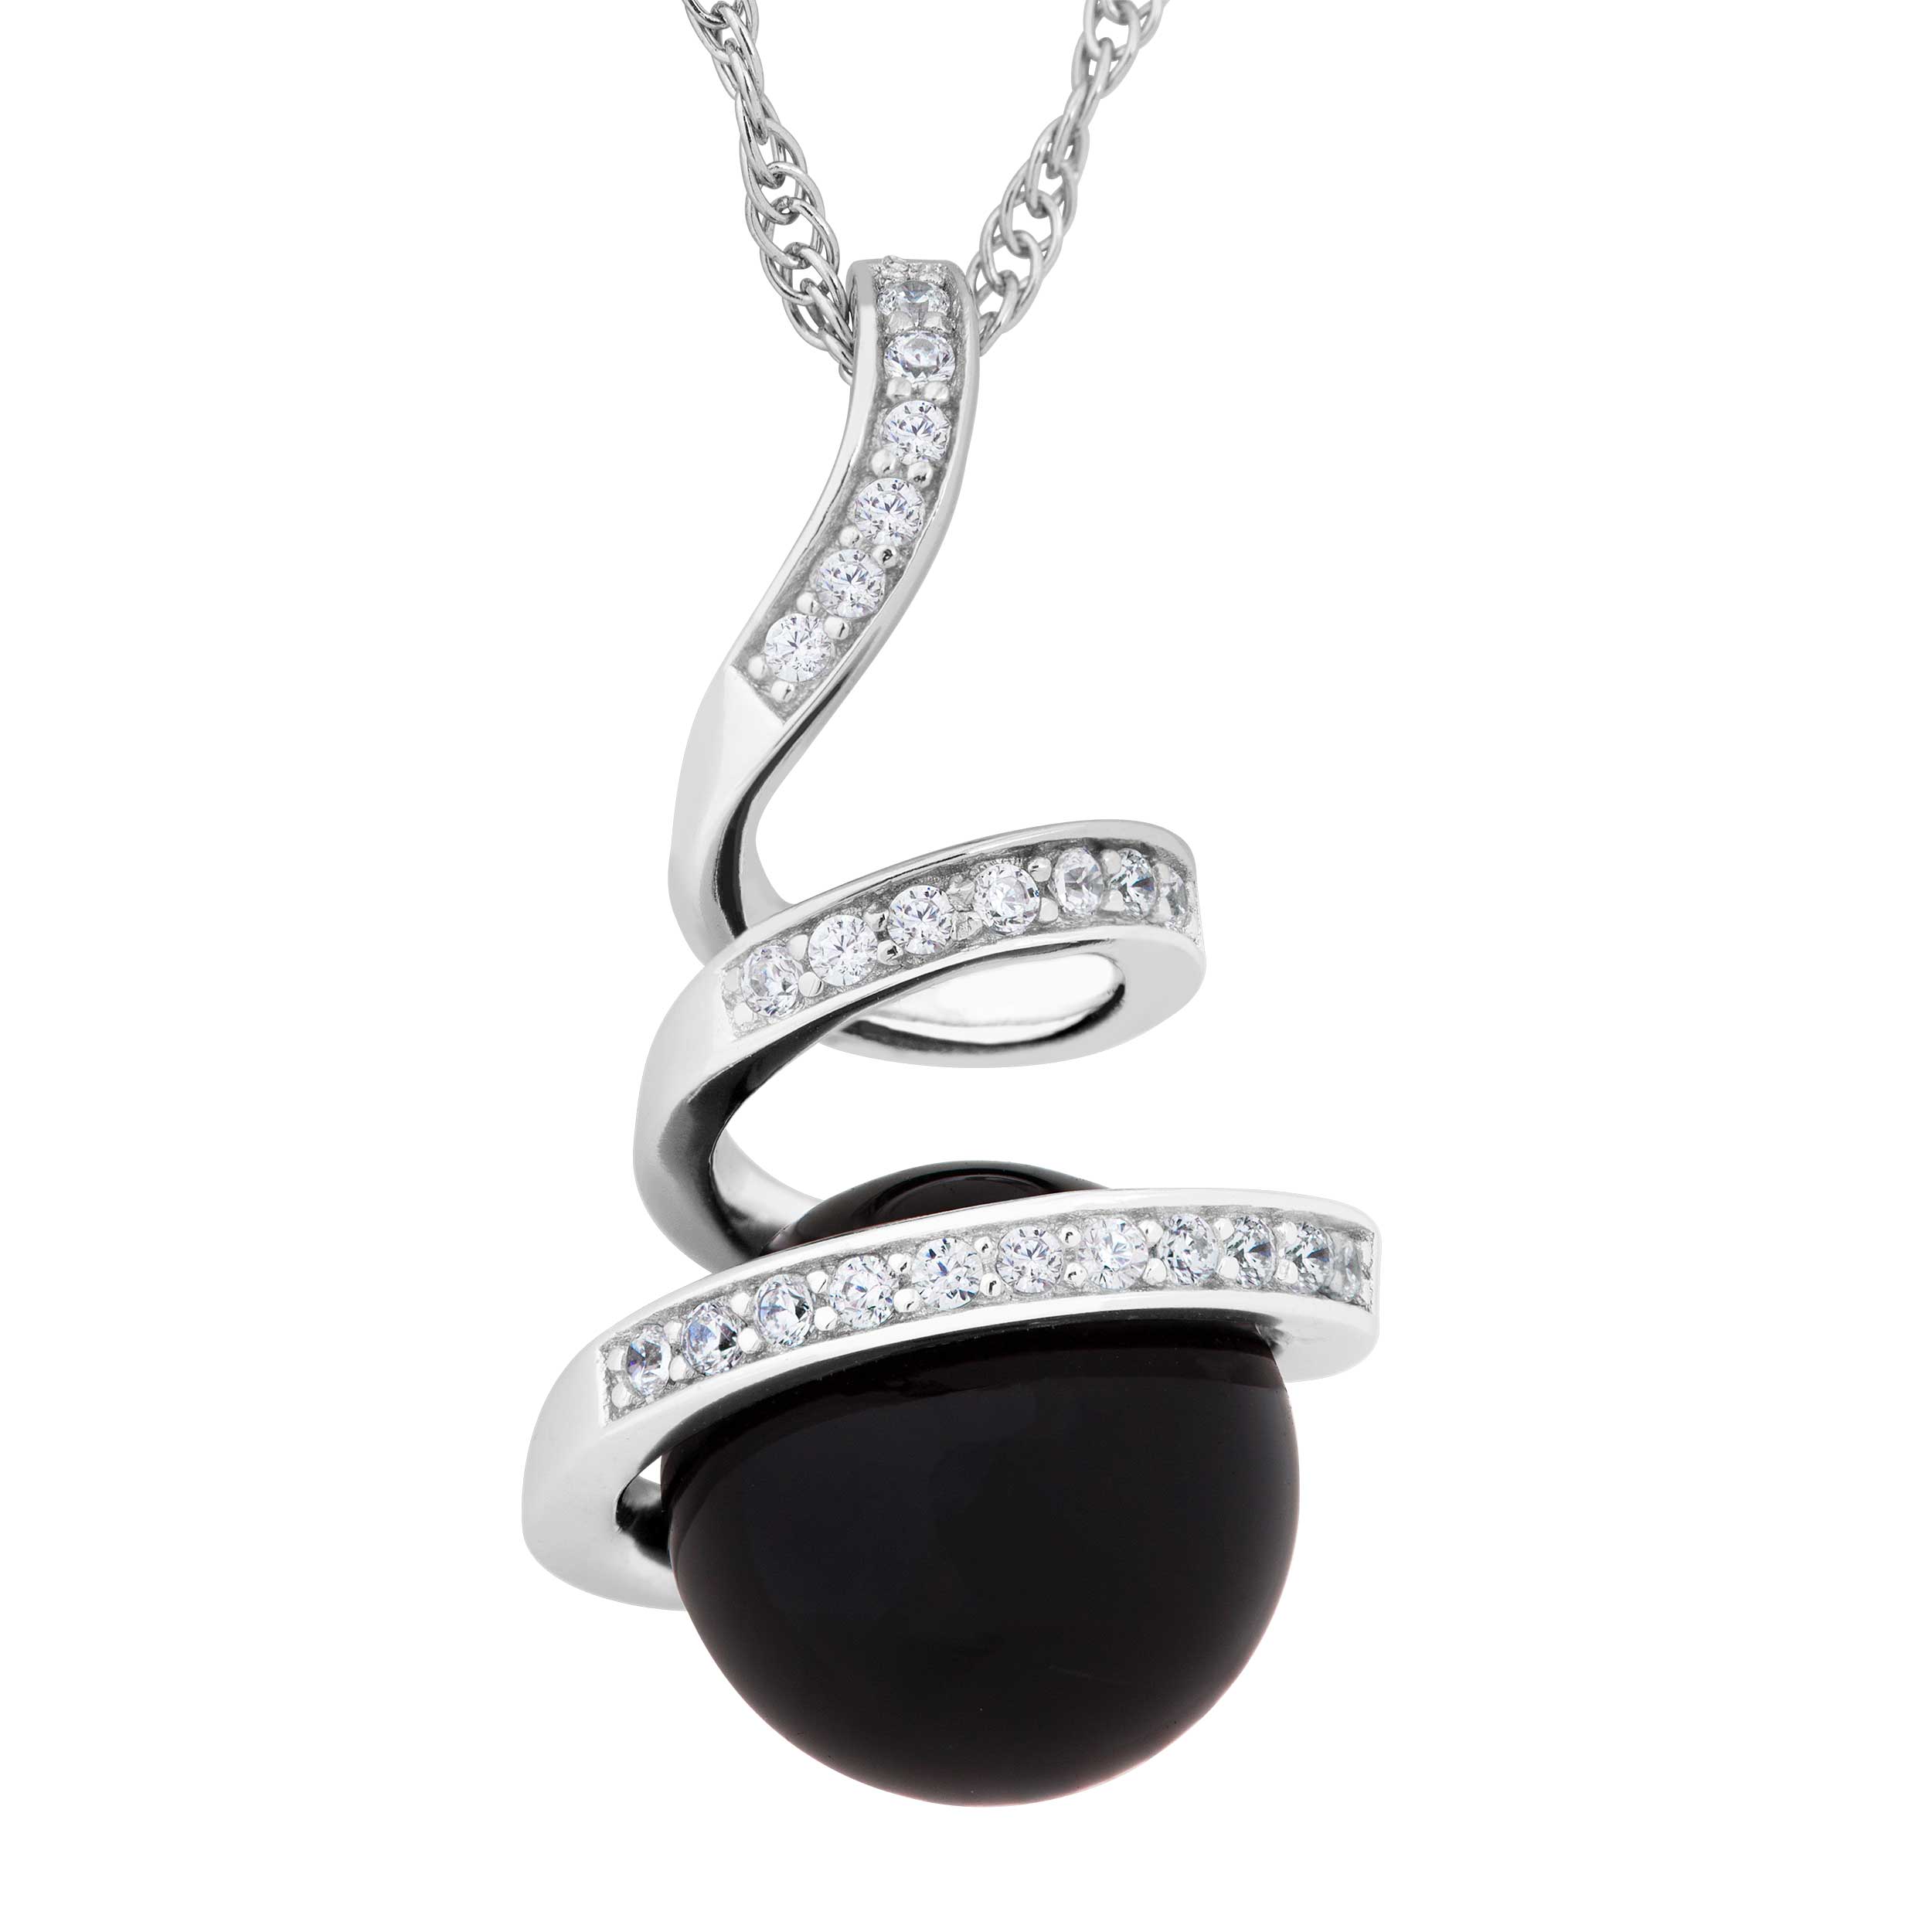  Onyx Pendant Necklace, Rhodium Plated Sterling Silver